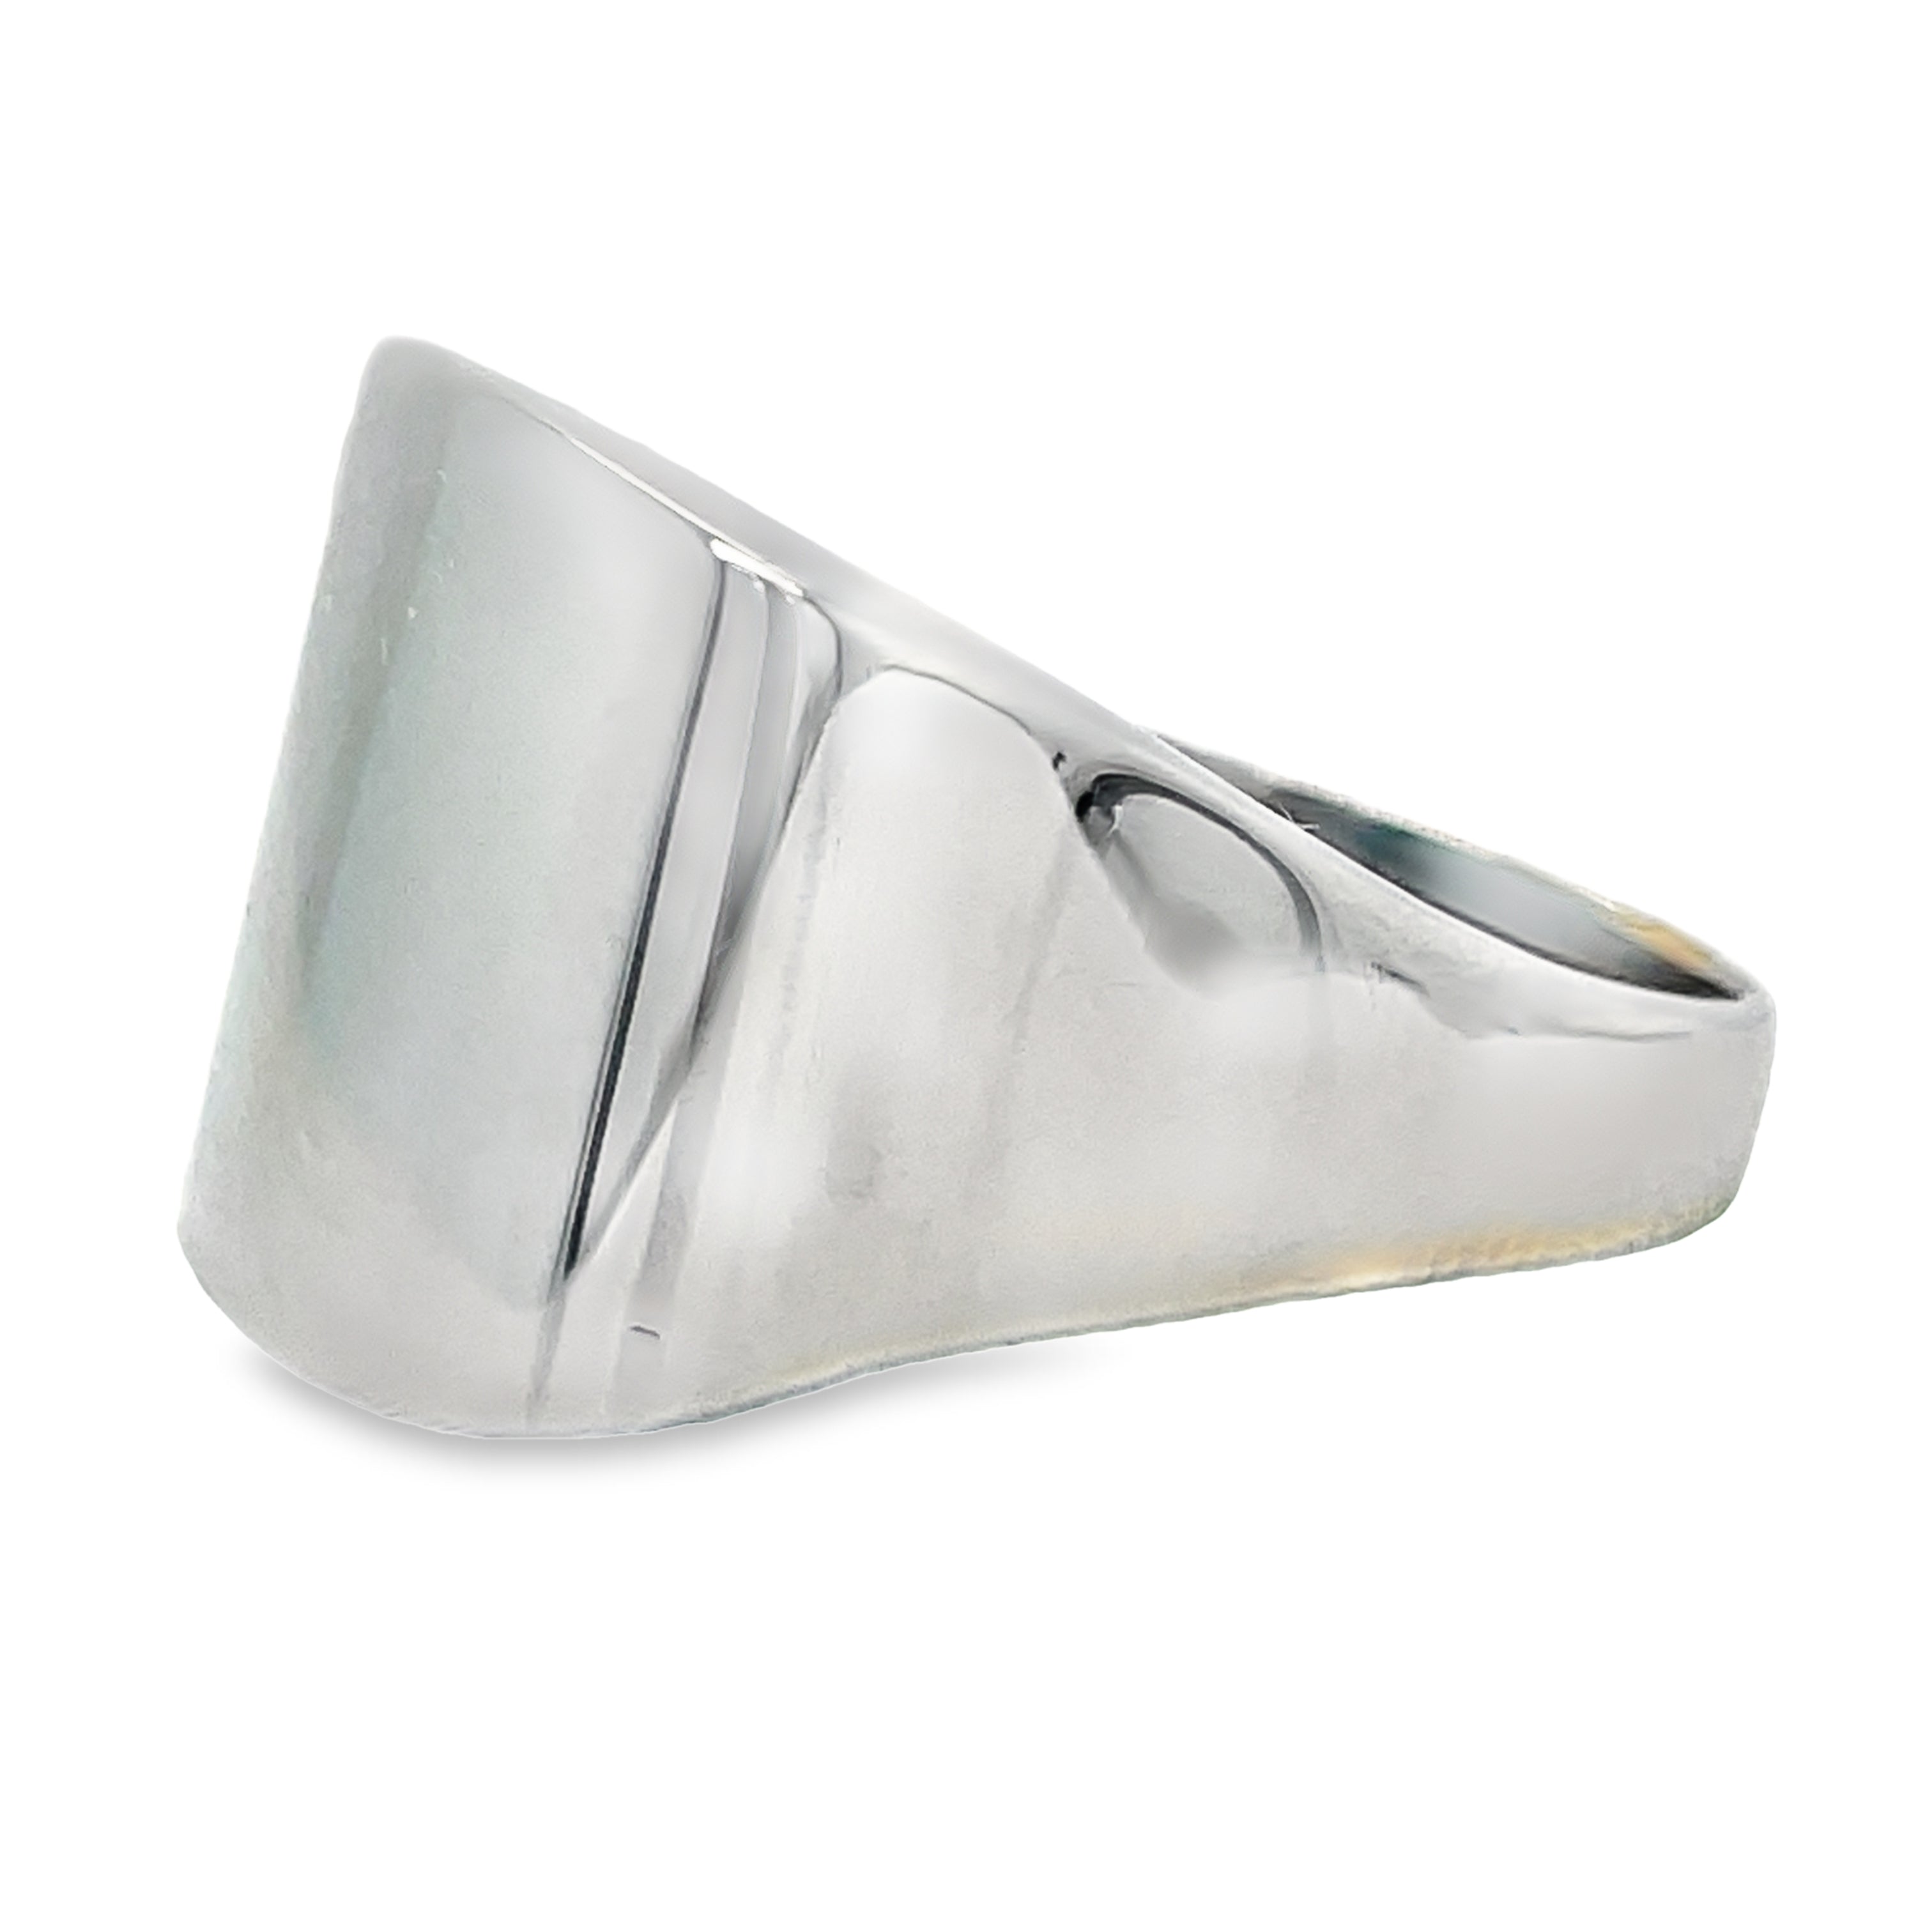 Crafted with 18k white gold, this modern square ring offers a sleek and elegant design that measures 18.00 x 22.00 mm. Perfect for enhancing any outfit, it's a timeless addition to your jewelry collection. Expertly designed and crafted, it's sure to make a statement.